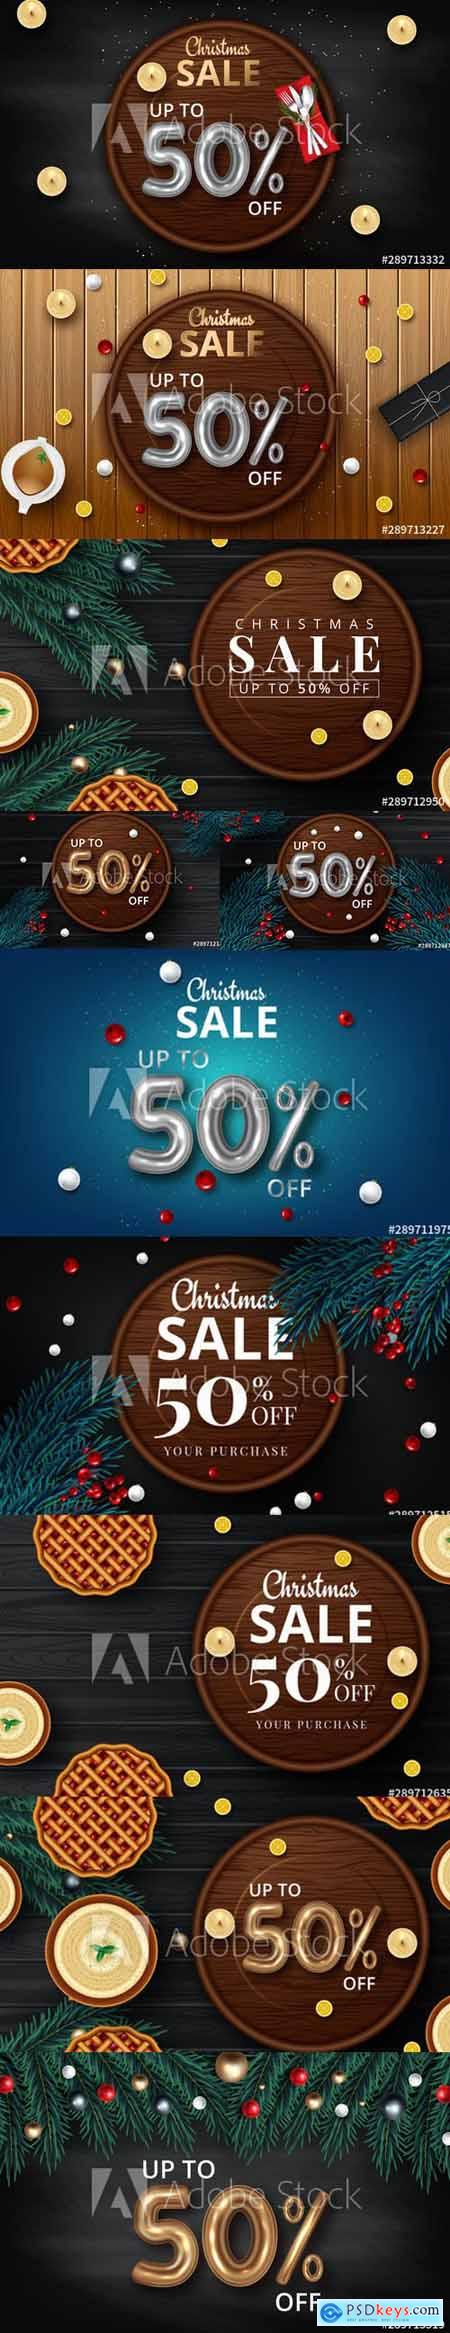 Christmas Sale Promotional Banner for Winter Holiday 2